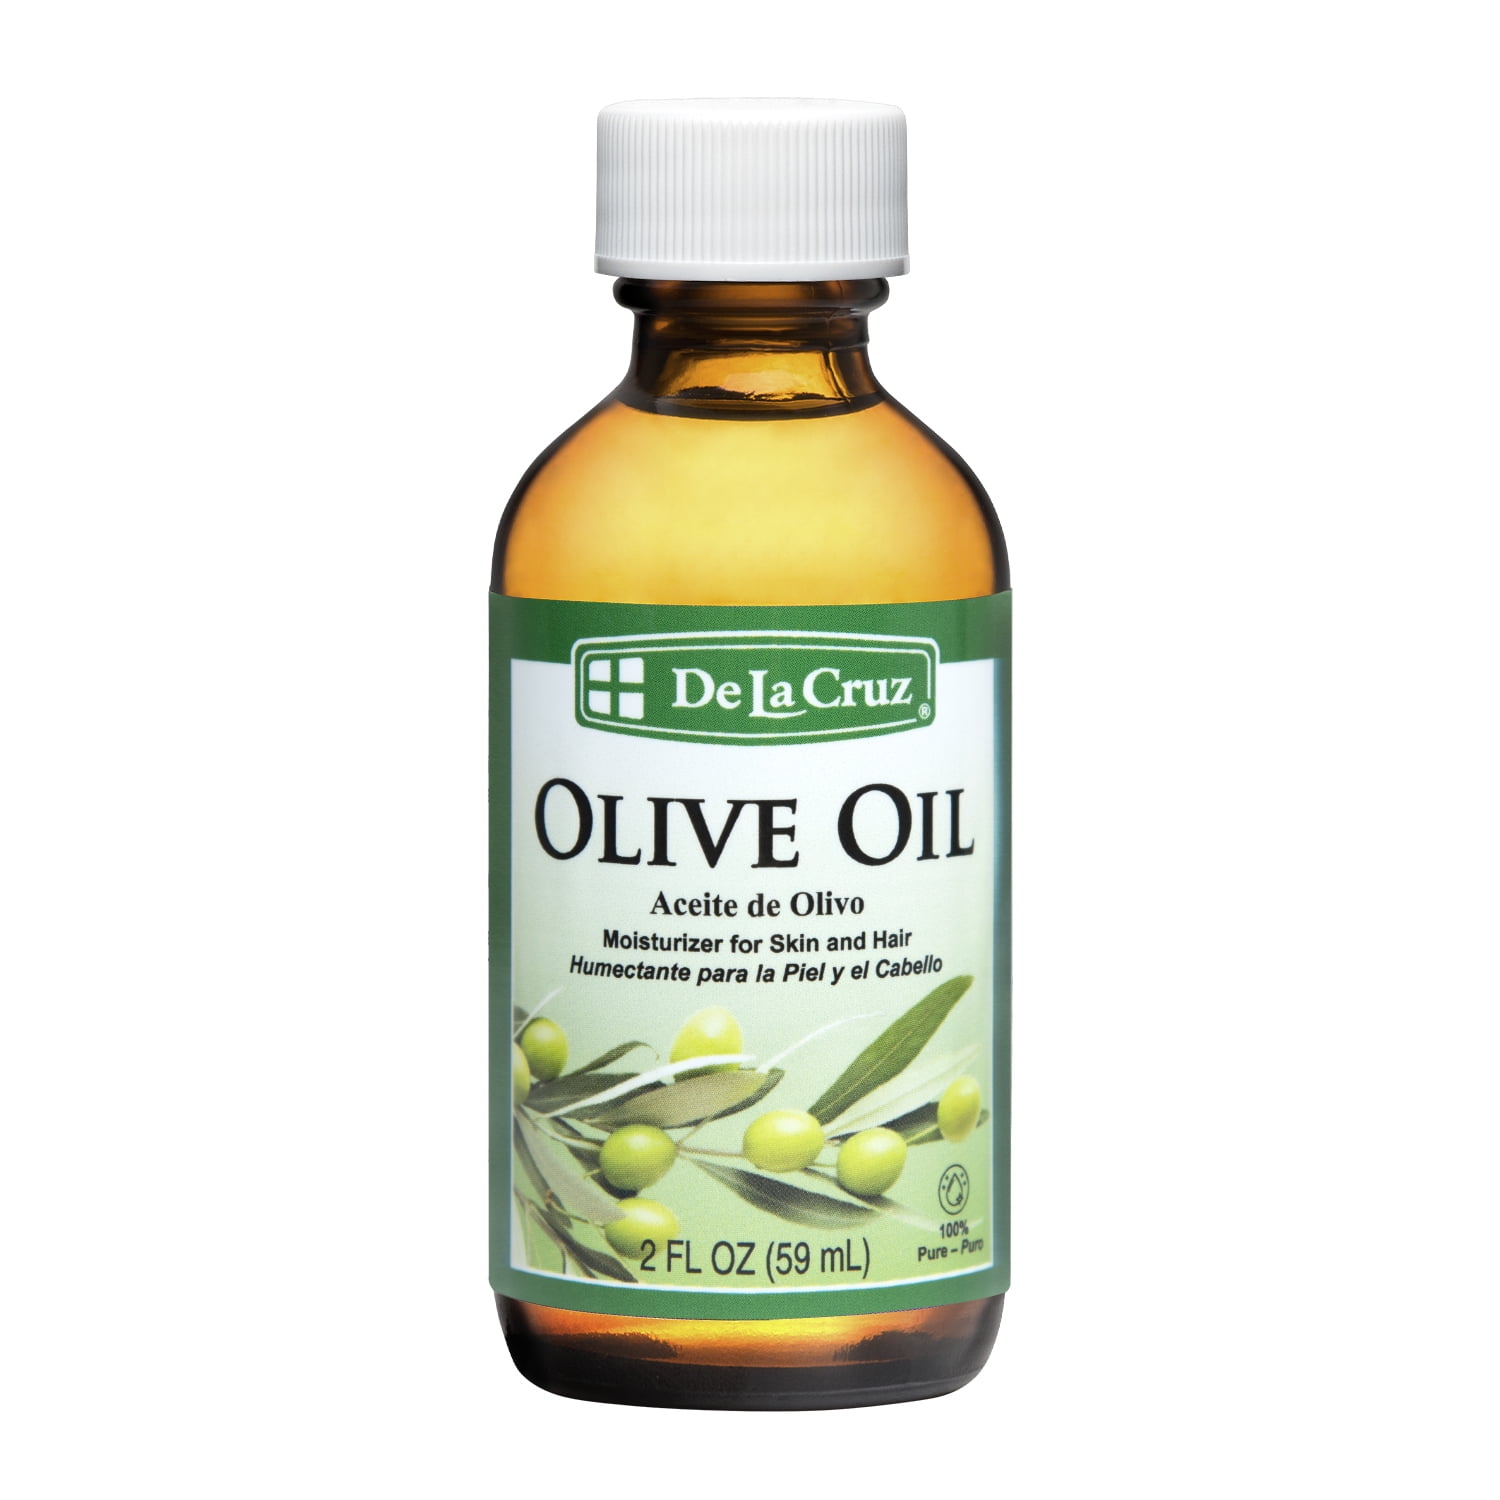 OK, Is Olive Oil Actually Good for Your Hair? – SheKnows